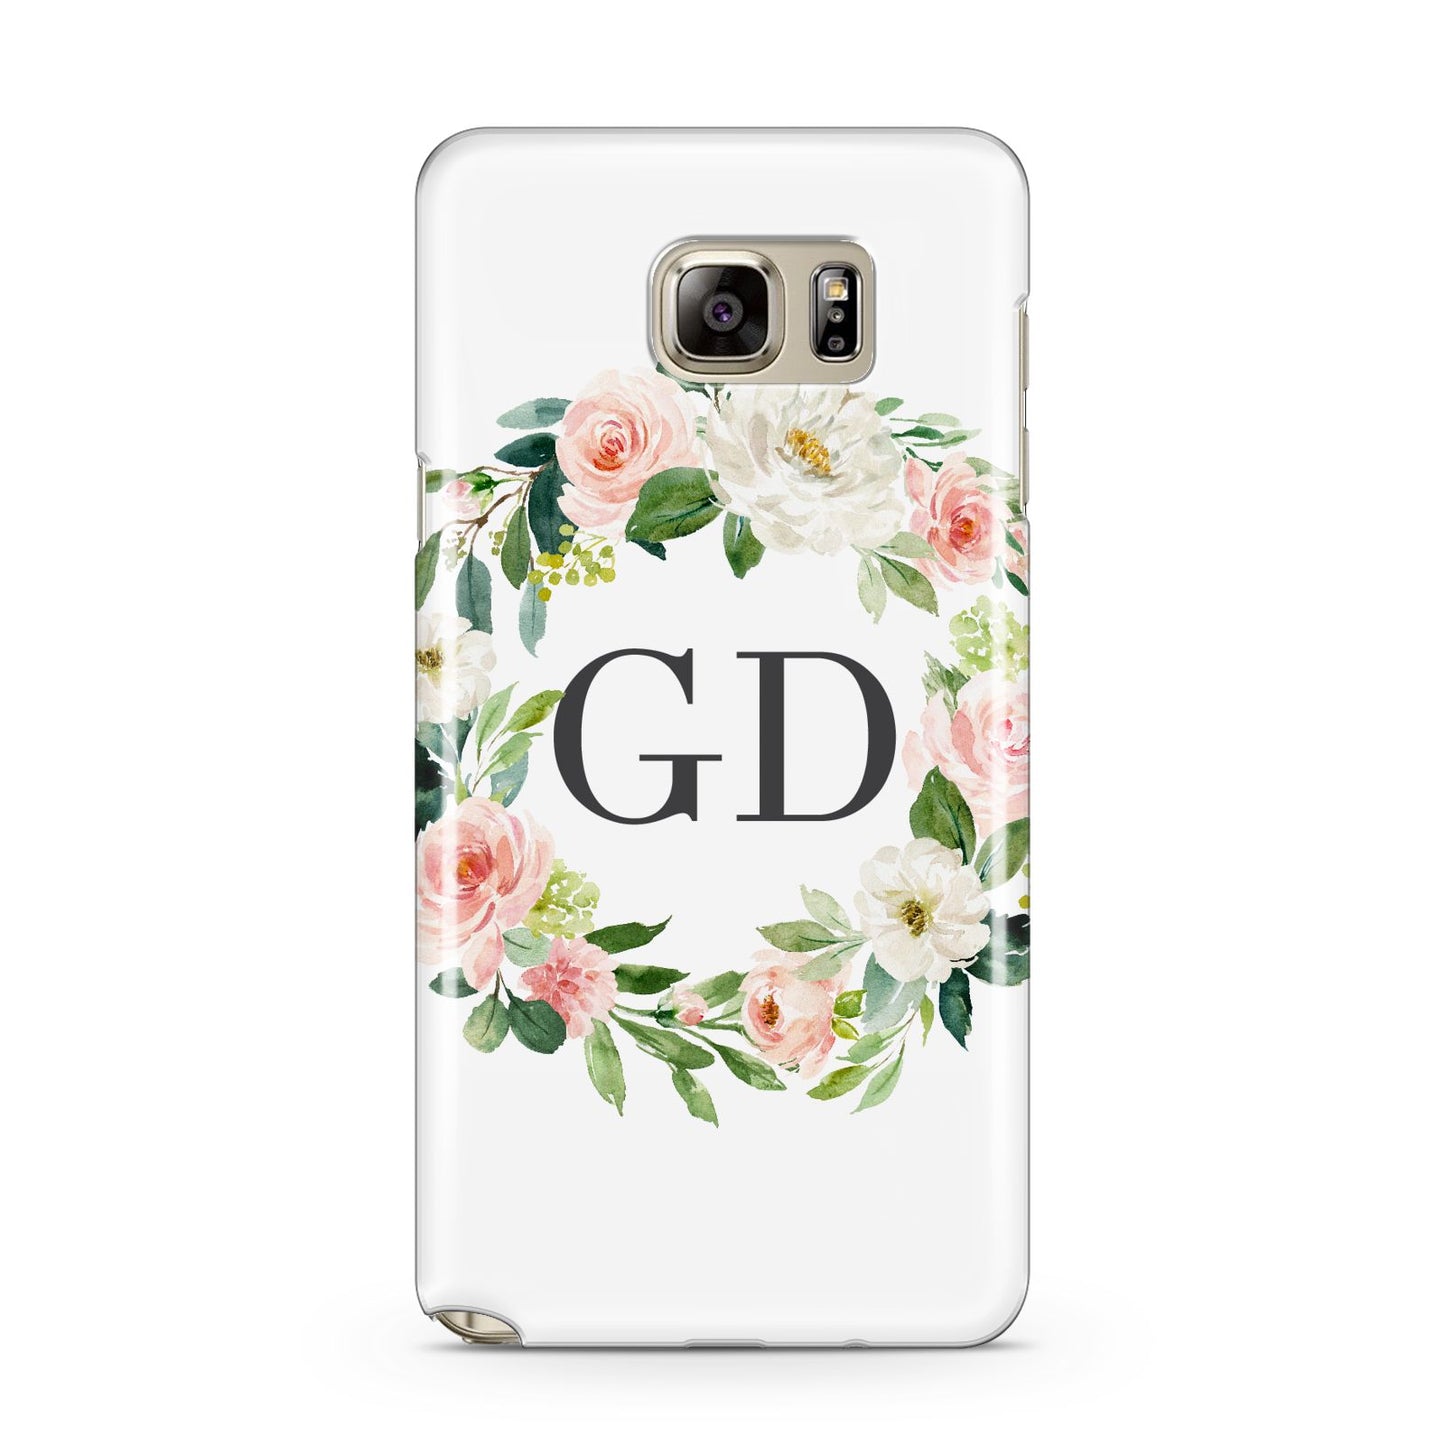 Personalised floral wreath Samsung Galaxy Note 5 Case